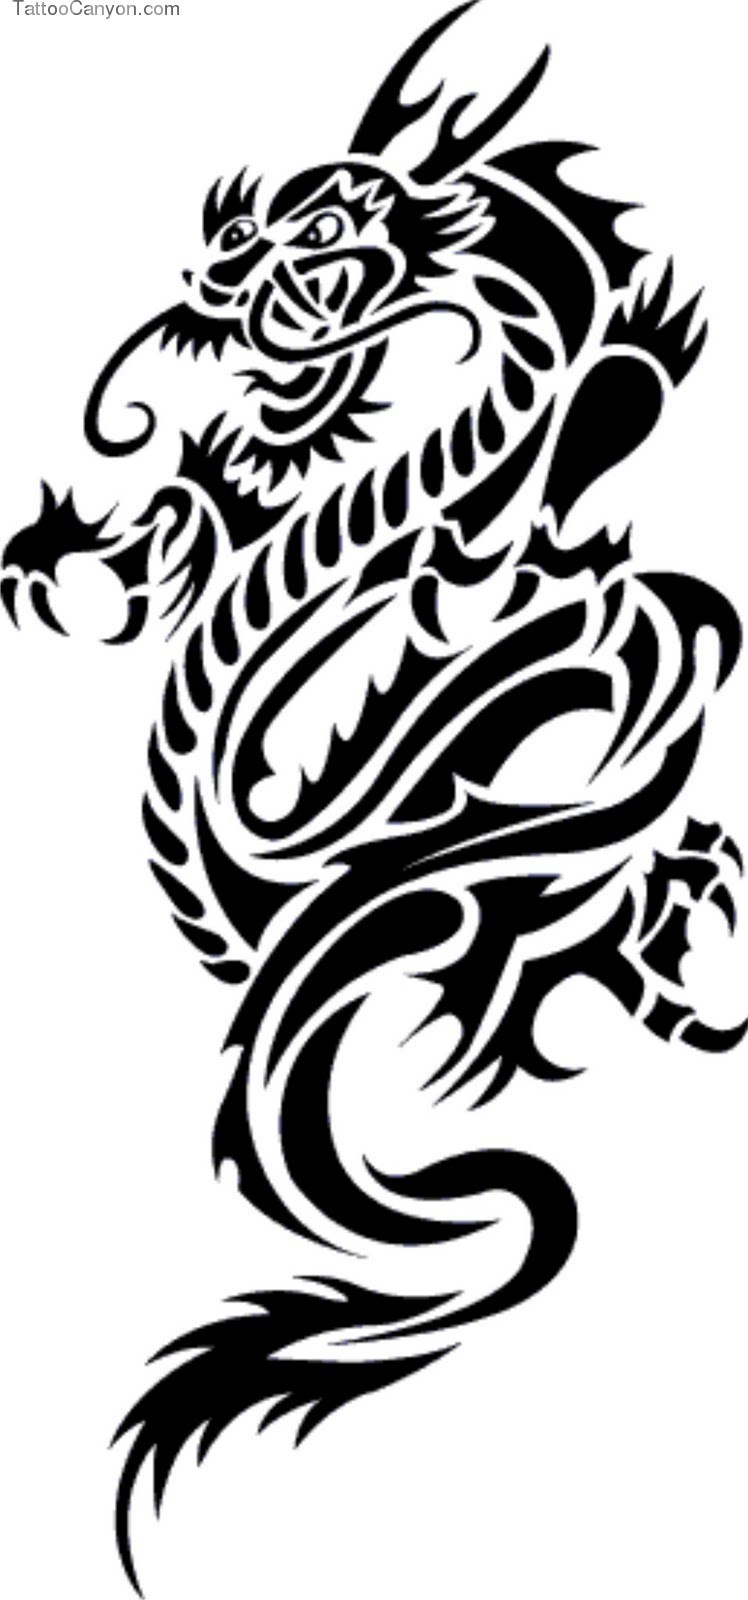 Free Download New Tattoos Dragon Tattoo Design Collection 3794 ...